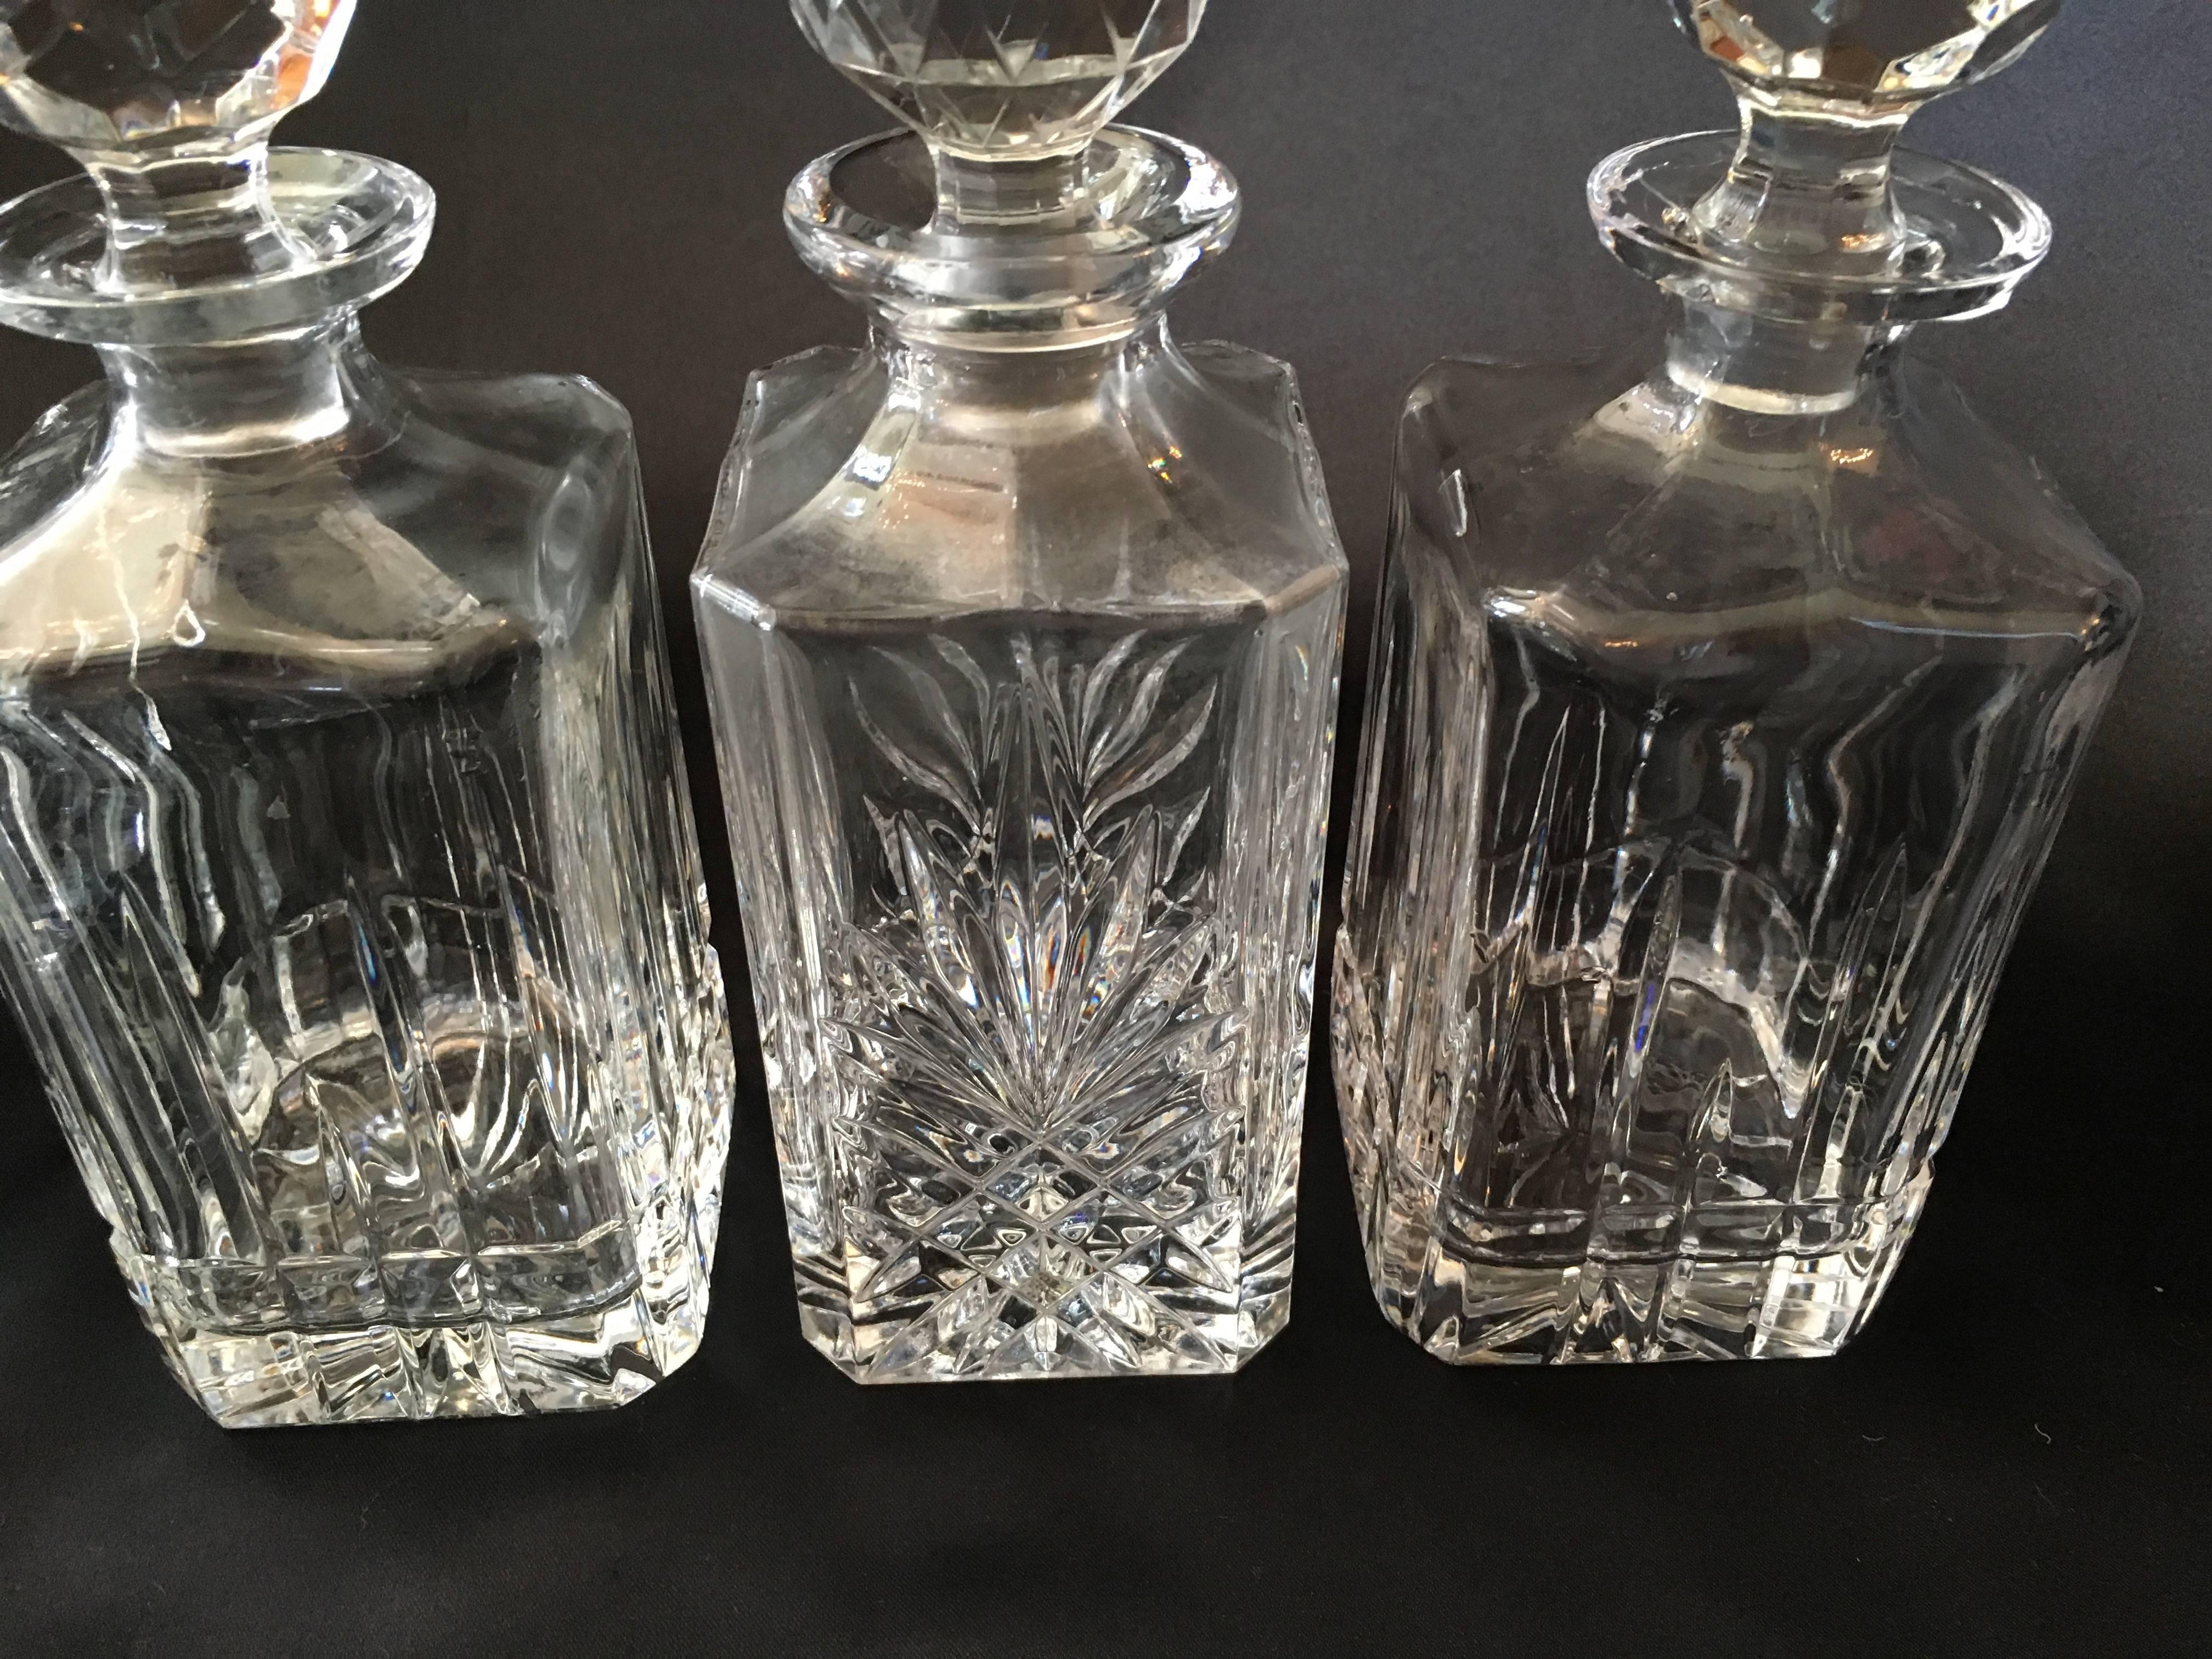 A perfect set for any bartender, the Stately English set contains six decanters. All complimentary in size and style. Two (identical) are cut lead crystal and the remaining four (identical) are glass, all with crystal, well fitted spherical stoppers